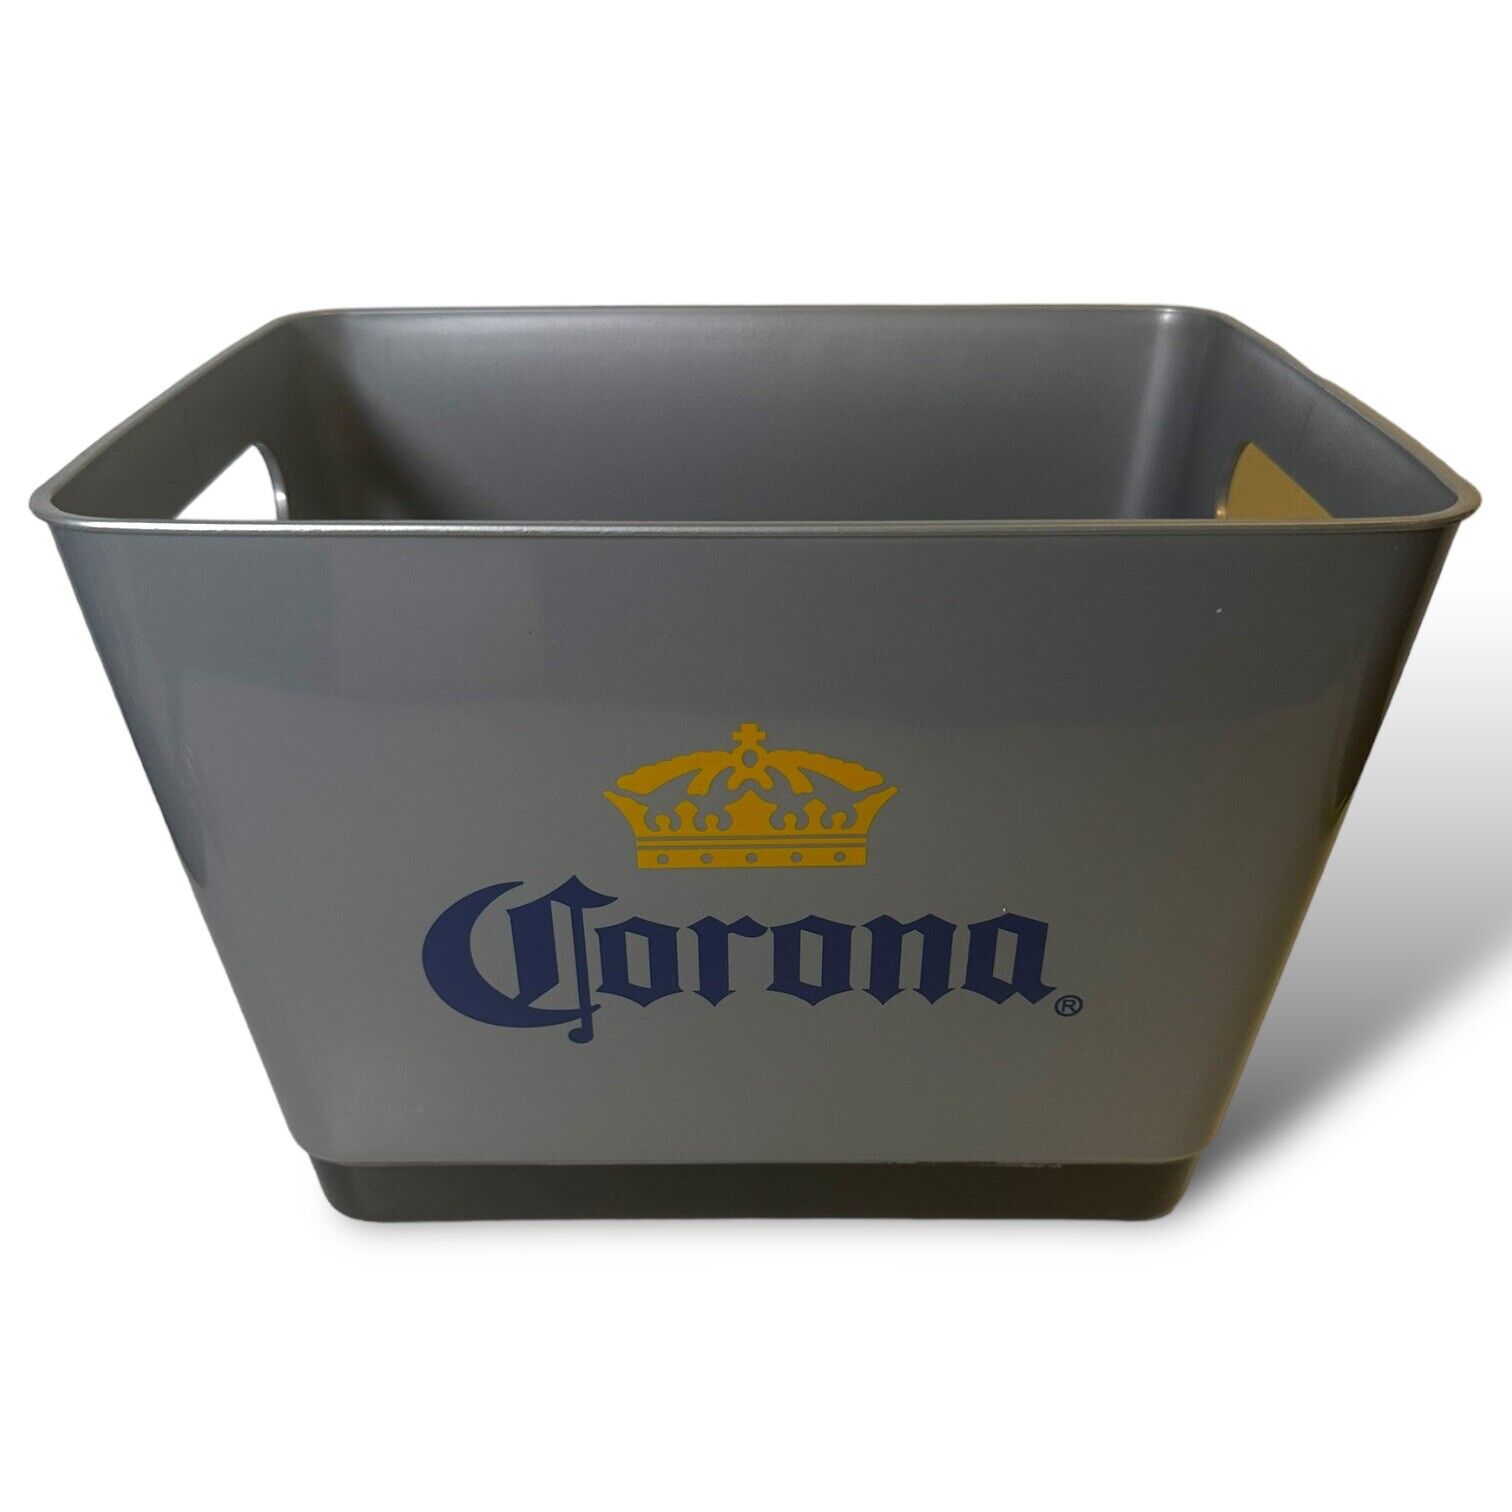 Corona Extra Ice Bucket For Beer & Beverages 11”Lx8”Wx7”H Plastic Brand New Grey